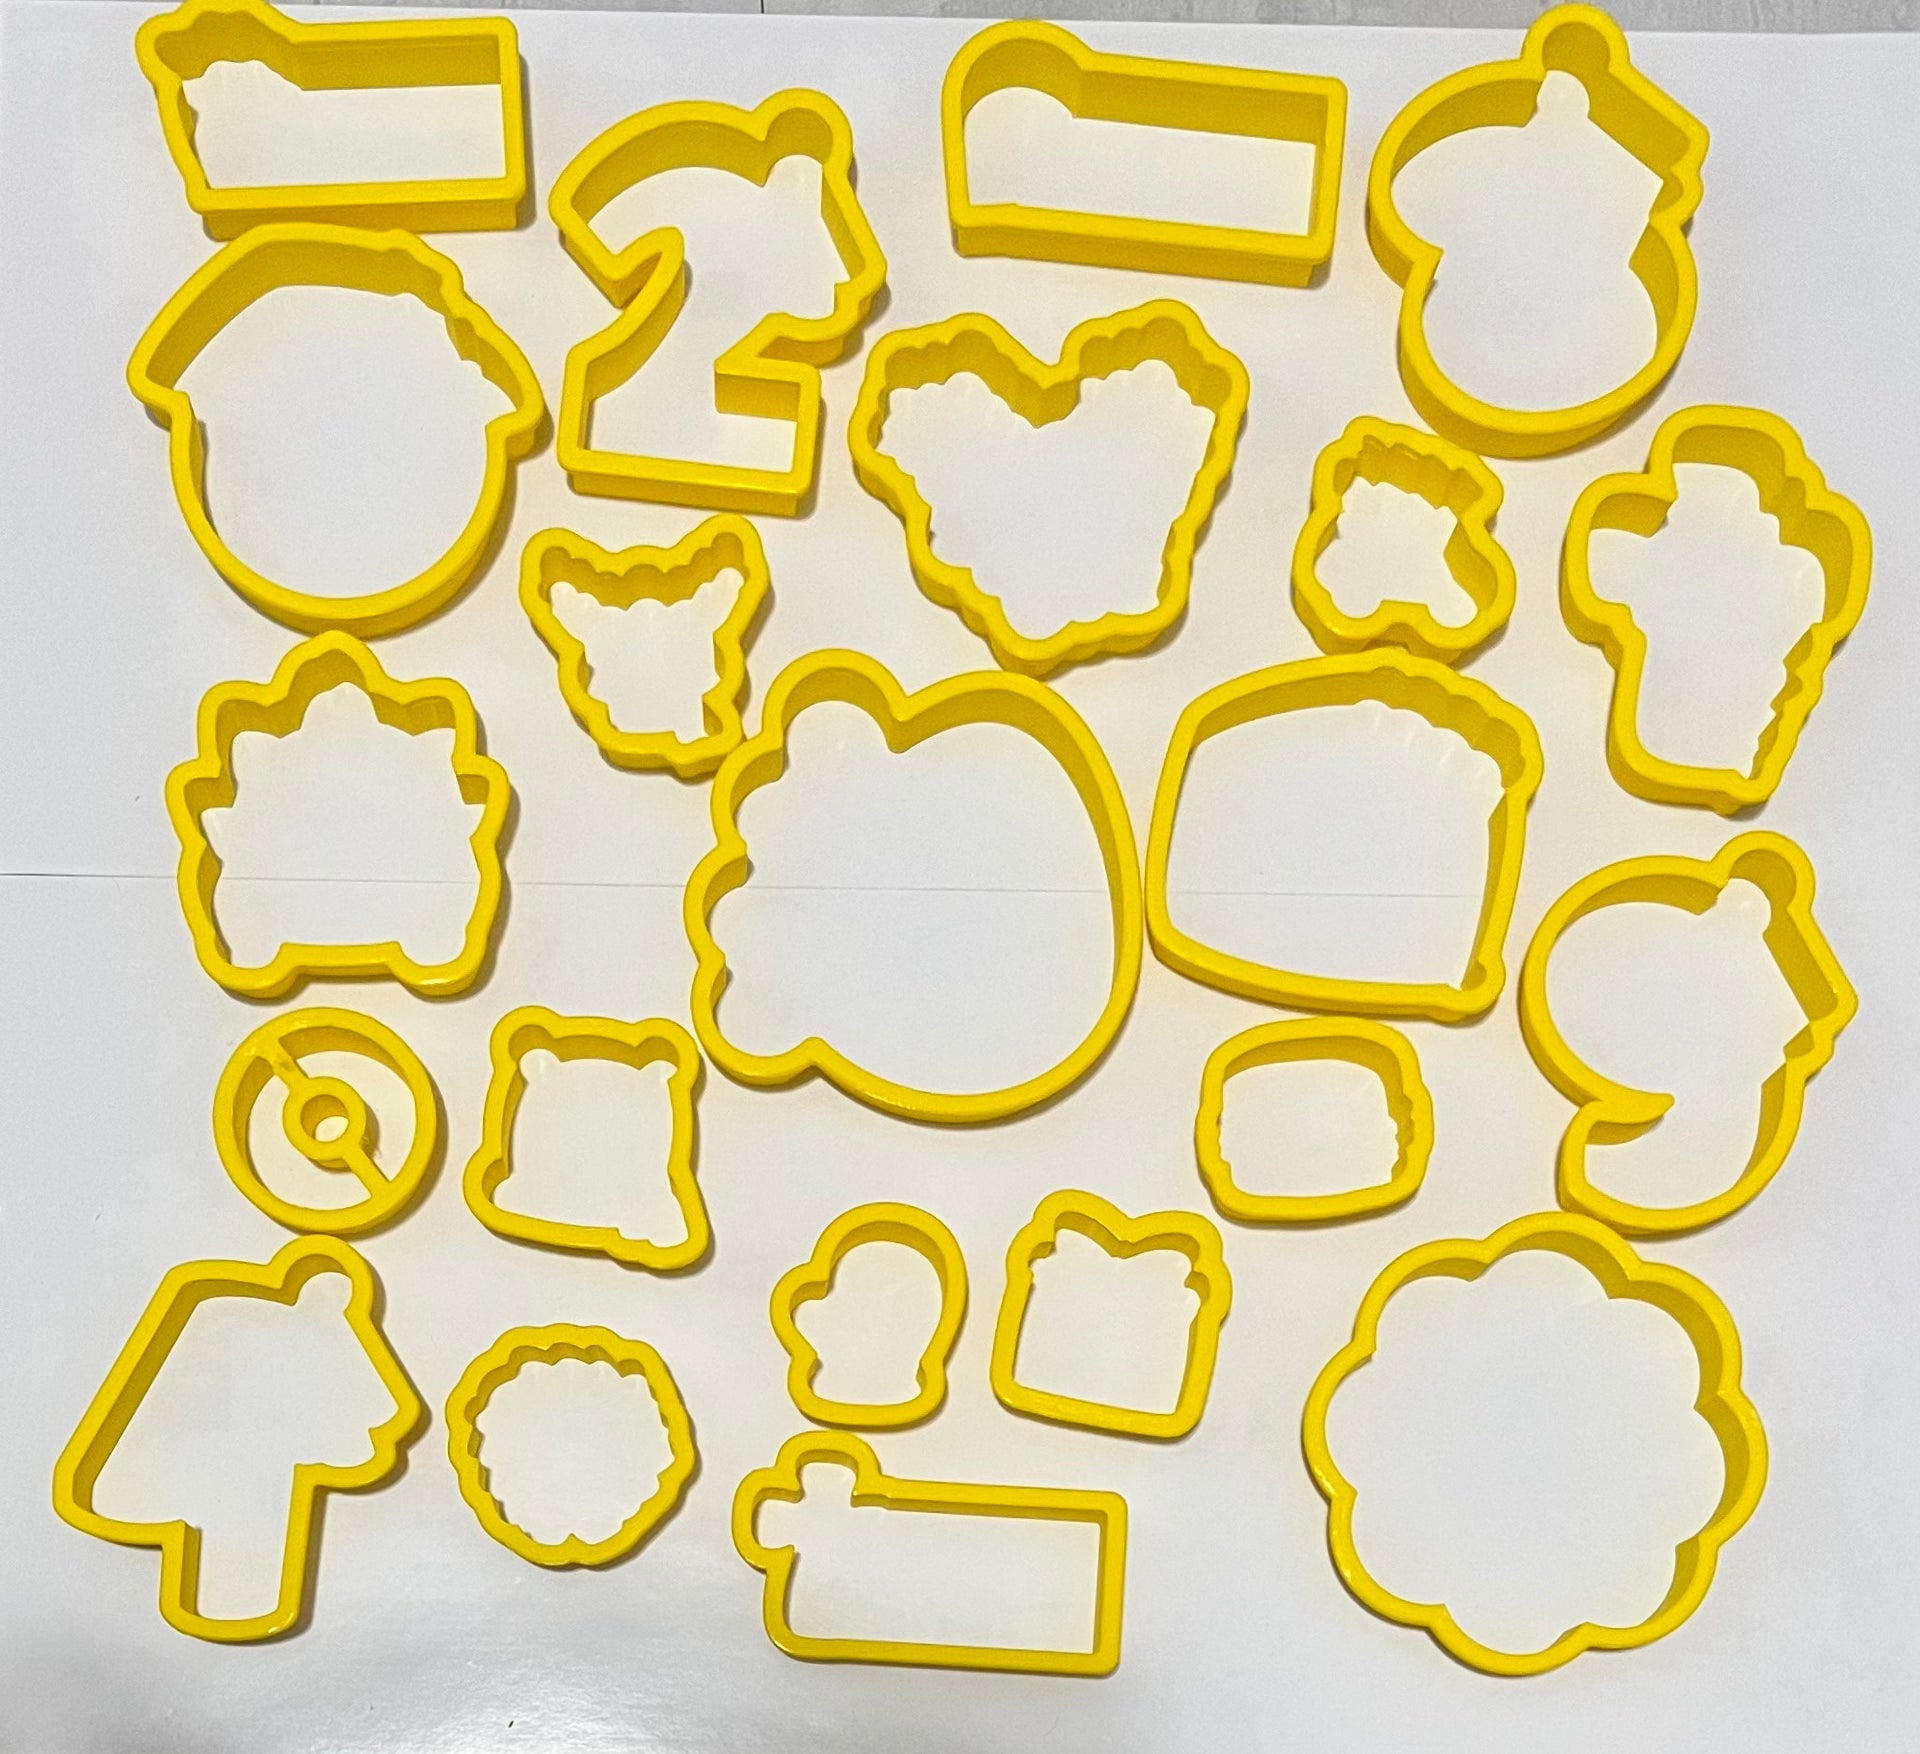 PURGE SPRING CLEANING BOX - PURCHASE SEPARATELY - Periwinkles Cookie Cutters 